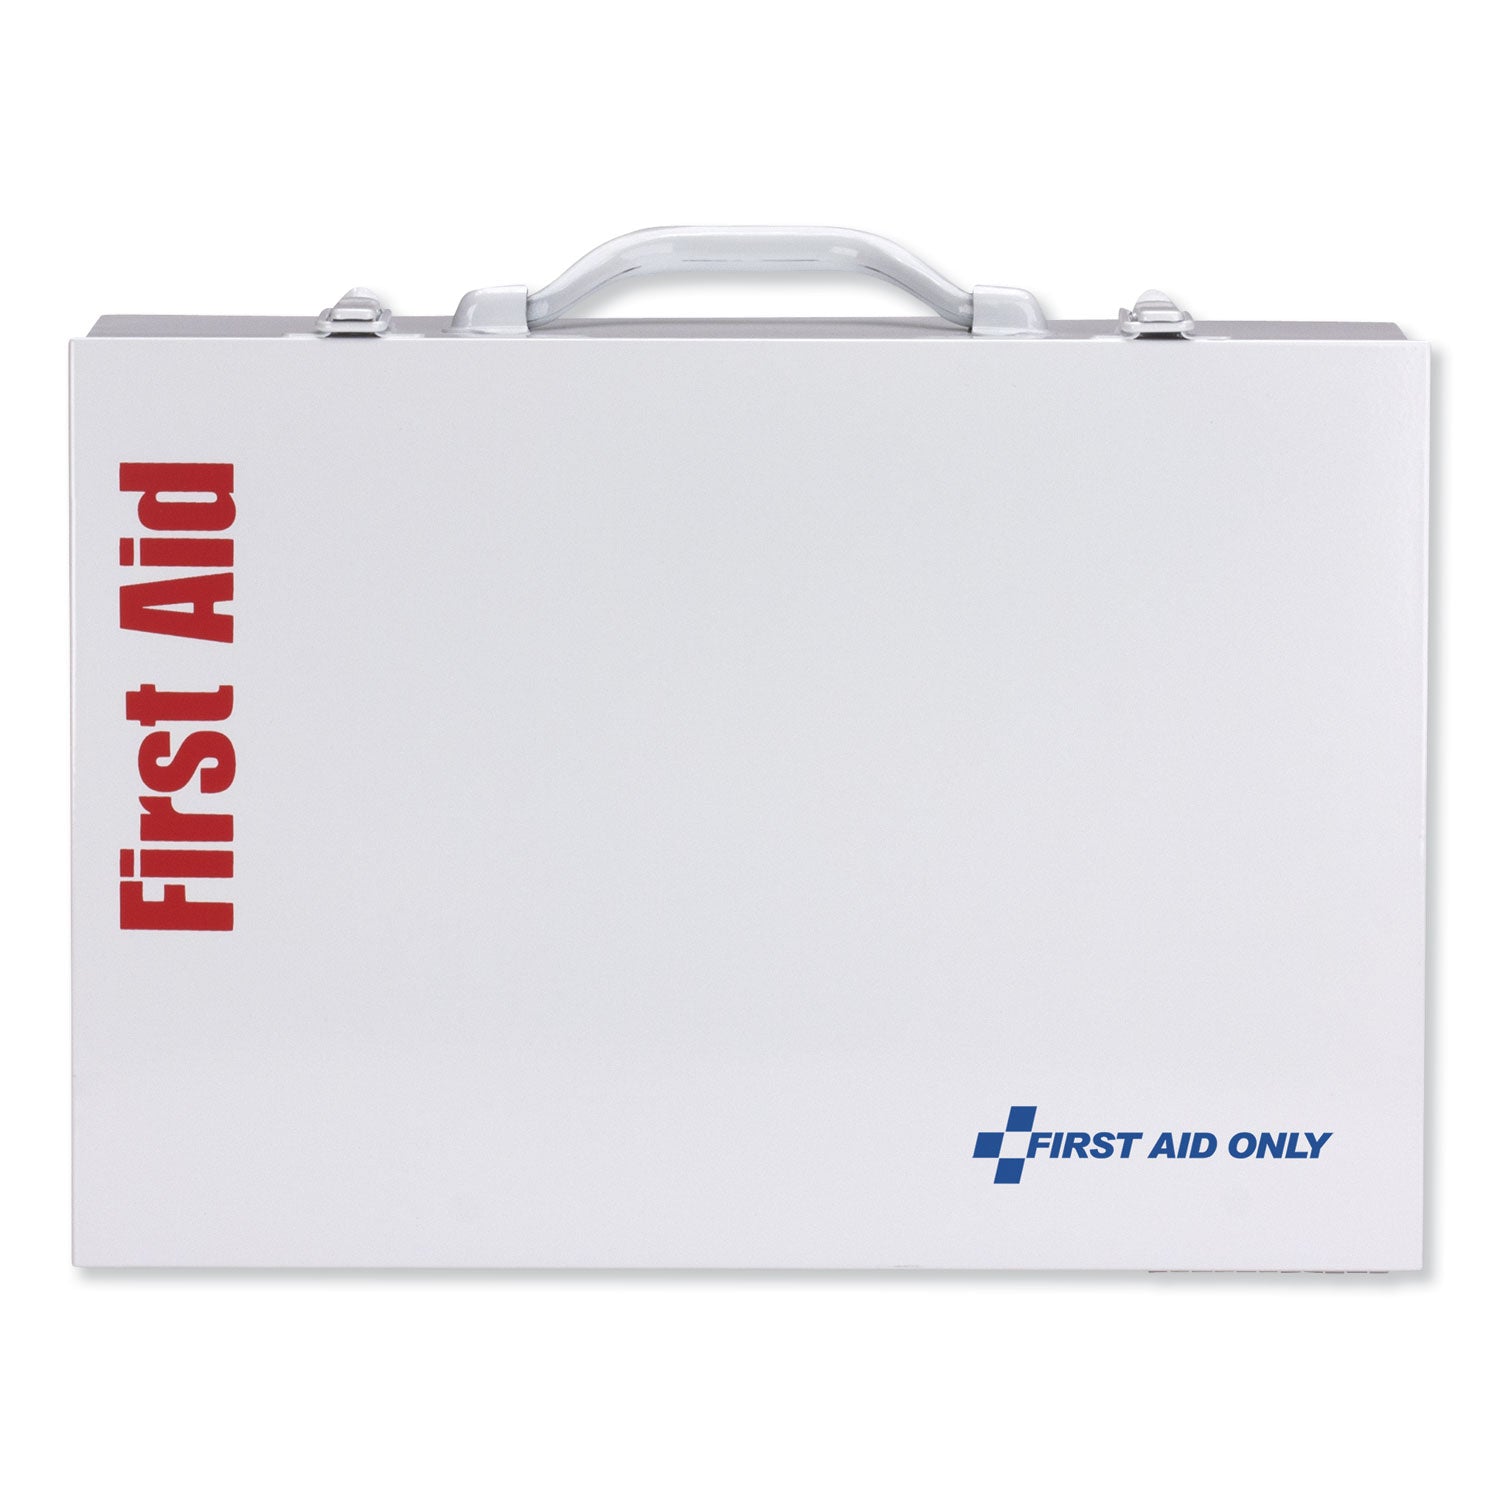 ansi-2015-class-b+-type-i-and-ii-industrial-first-aid-kit-for-75-people-446-pieces-metal-case_fao90573 - 3